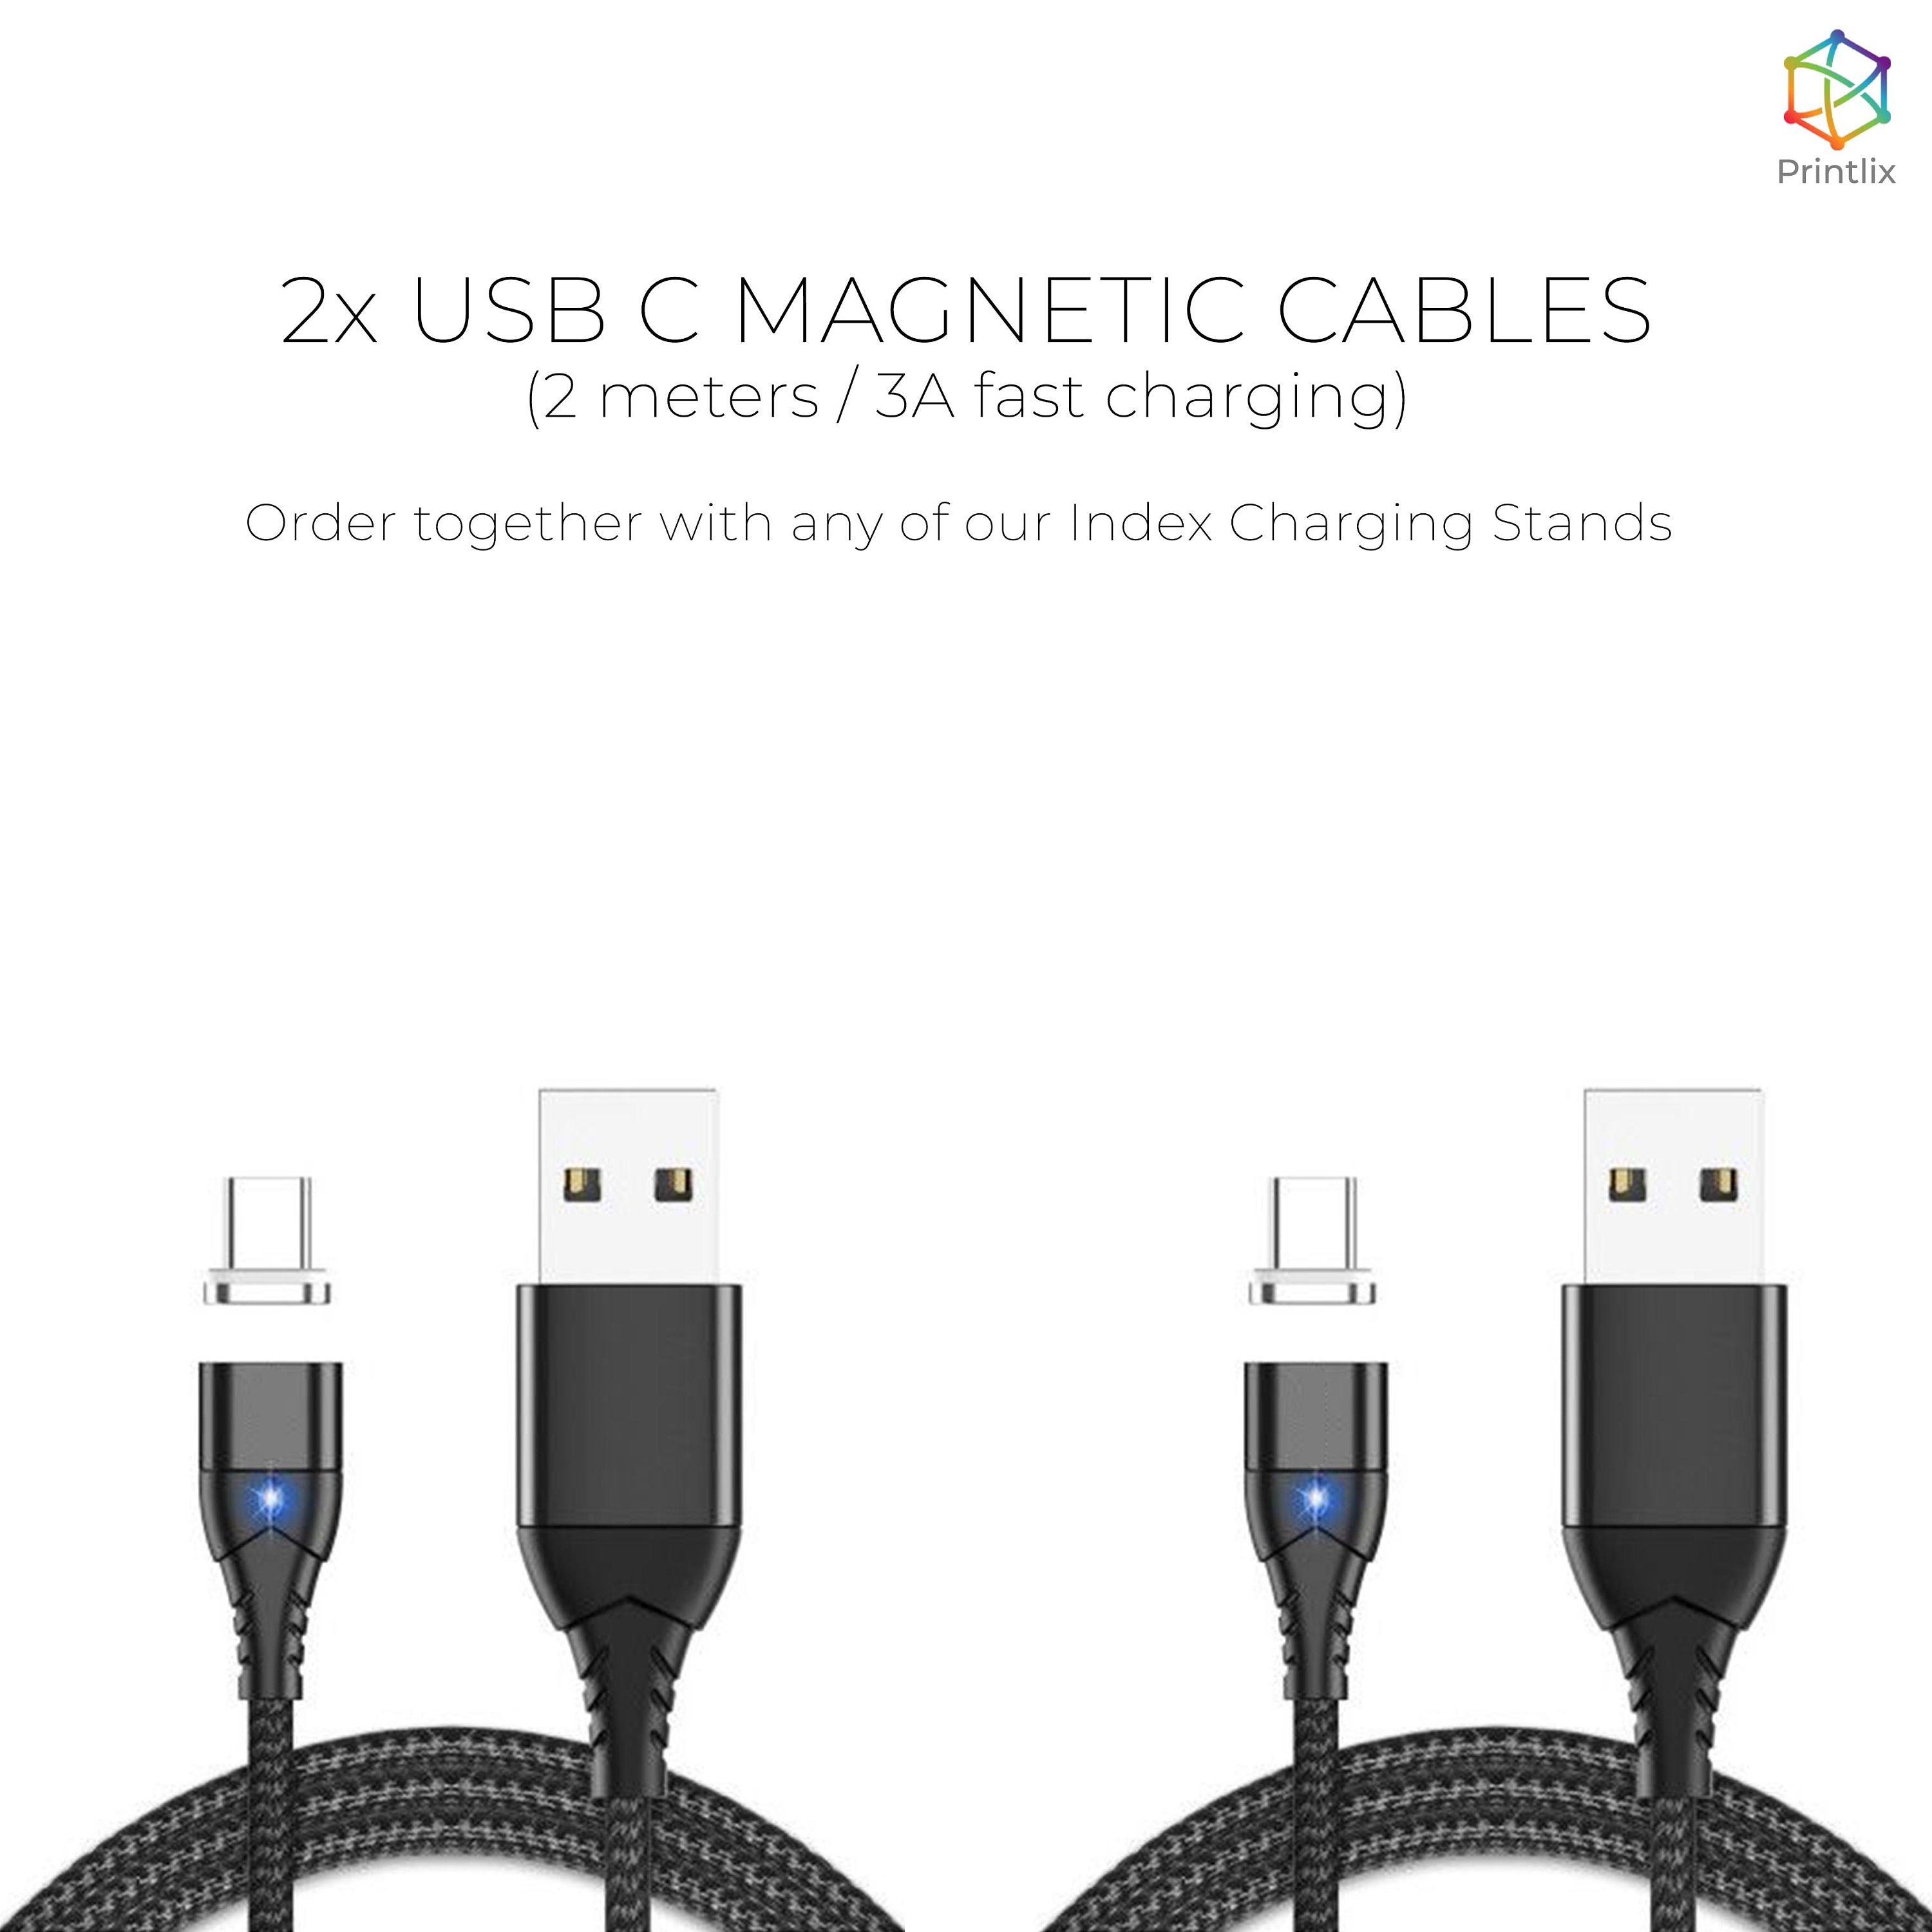 USB C Magnetic Charging Cables 2-Pack